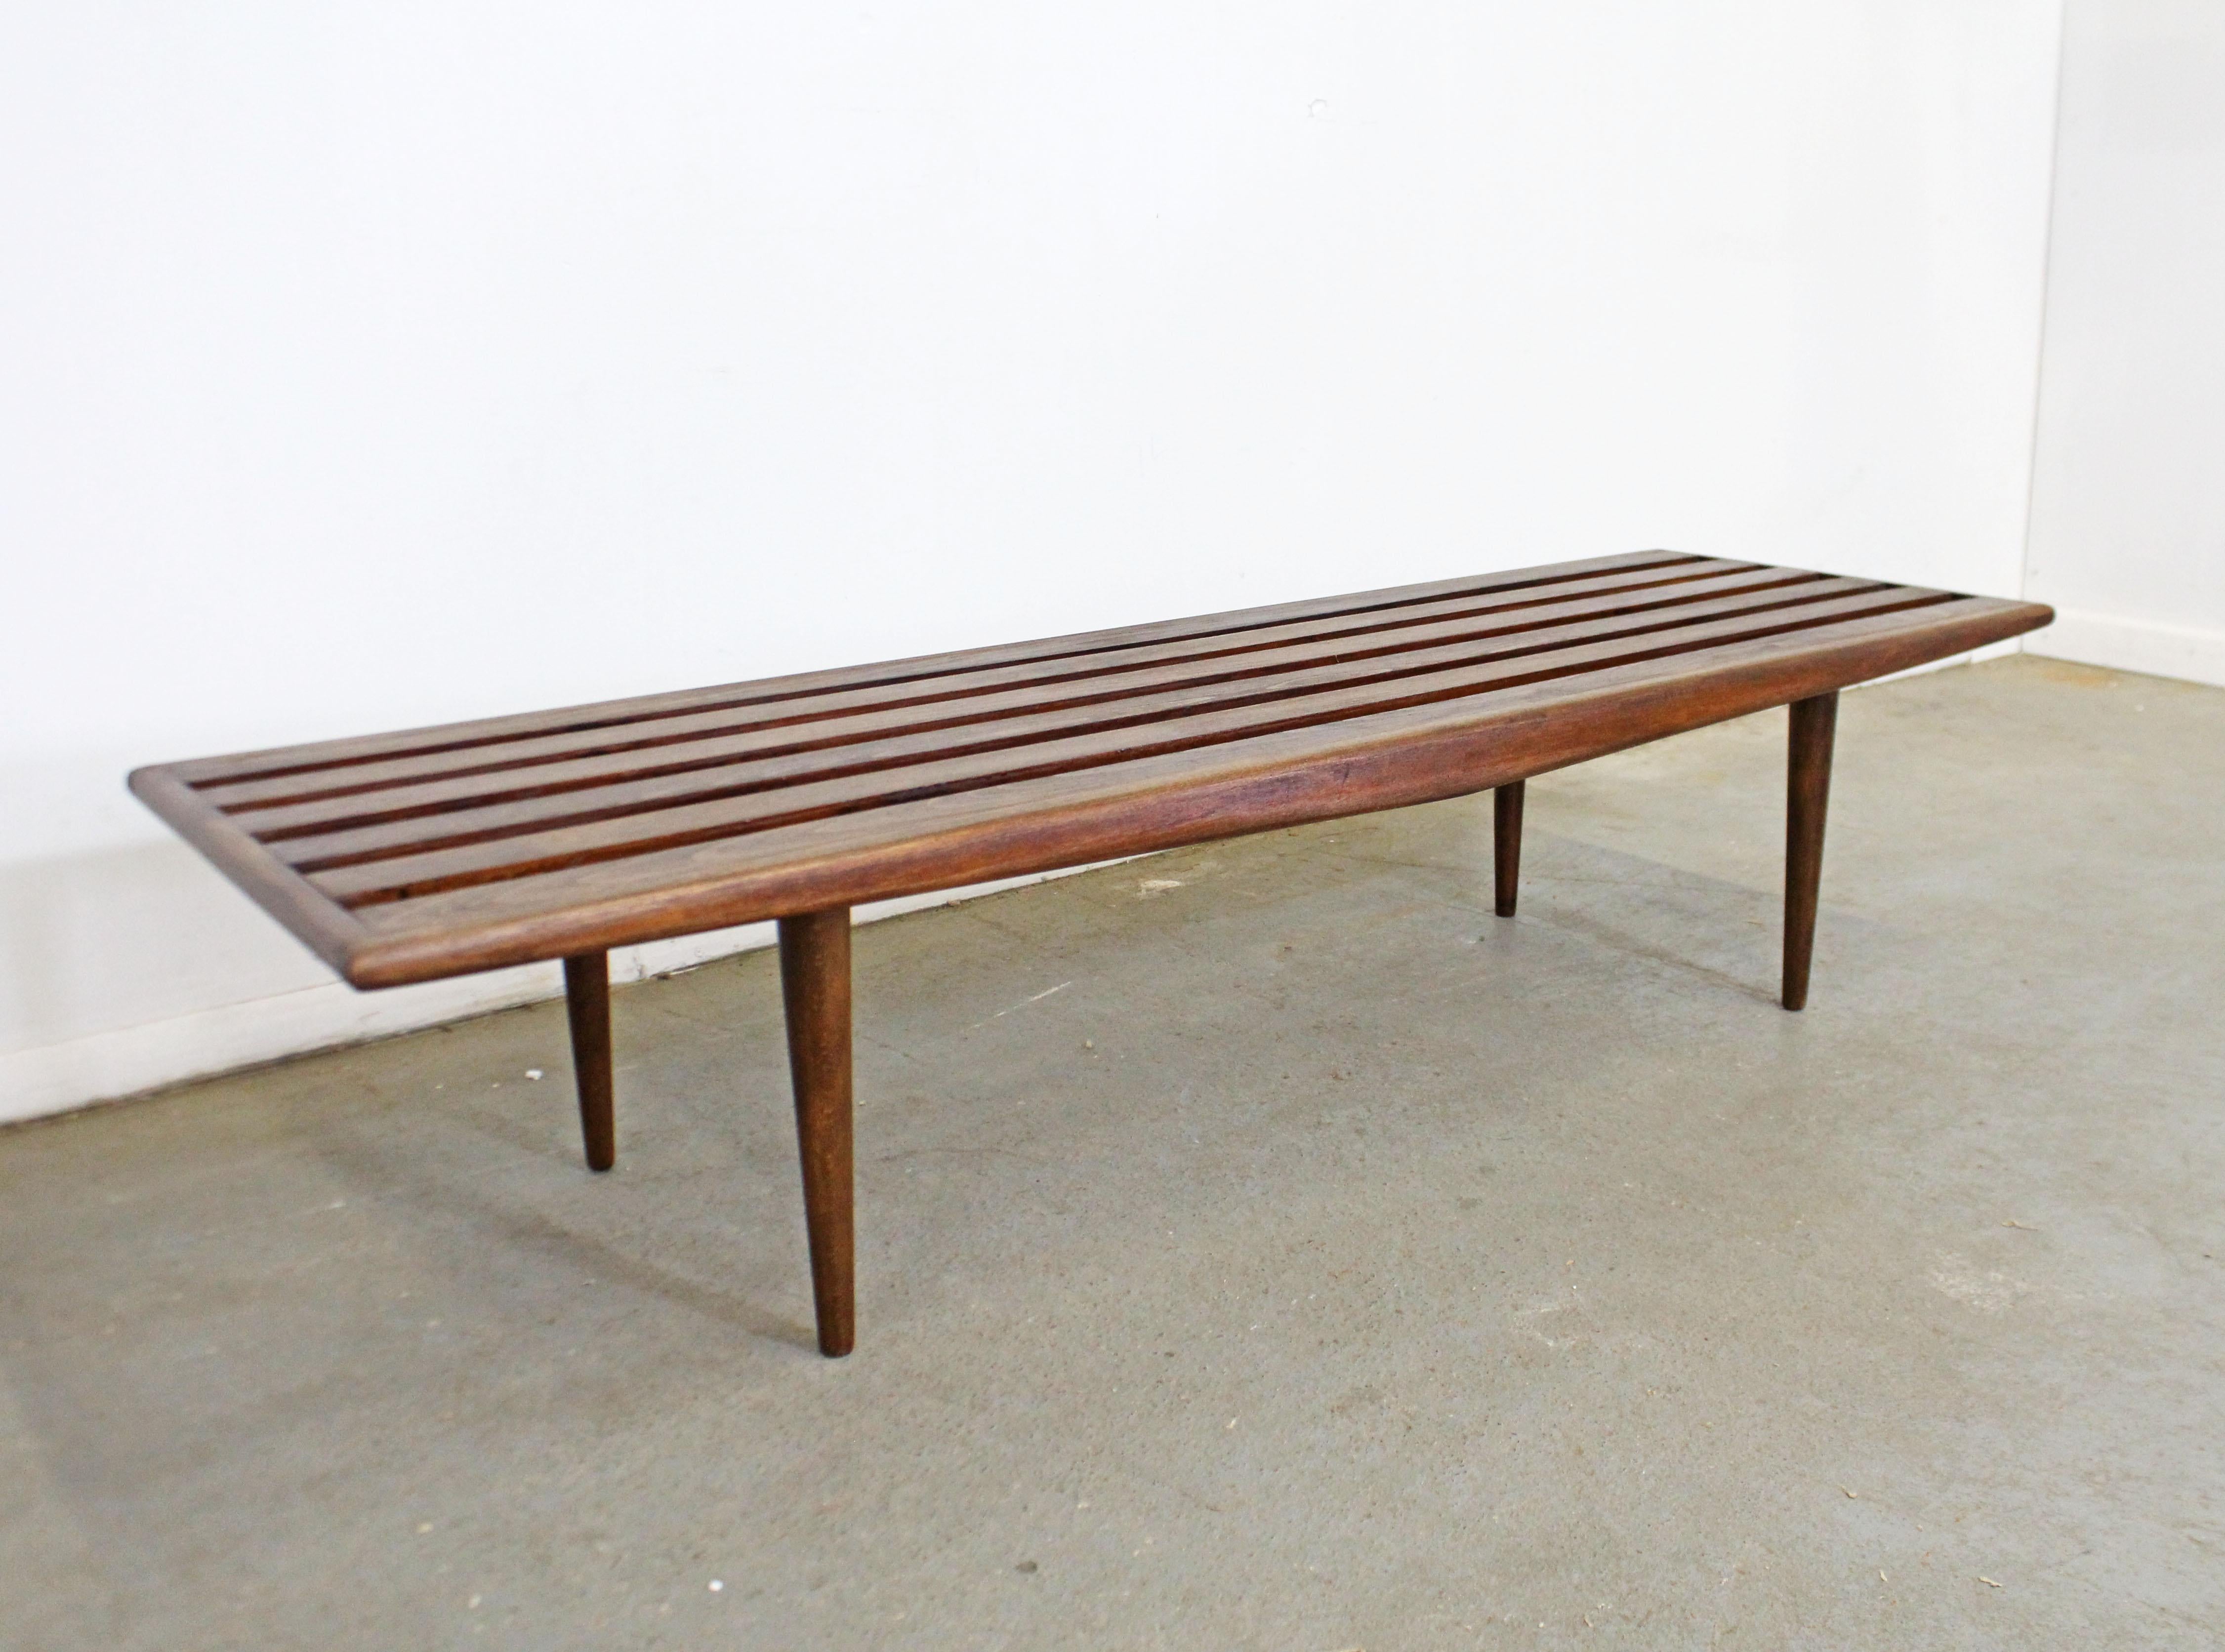 What a find. Offered is a vintage Mid-Century Modern walnut slat bench coffee table. It has a nice look with a sculpted top made of wood slats. Has been refinished and is in good condition with minor surface wear. It is structurally sound and